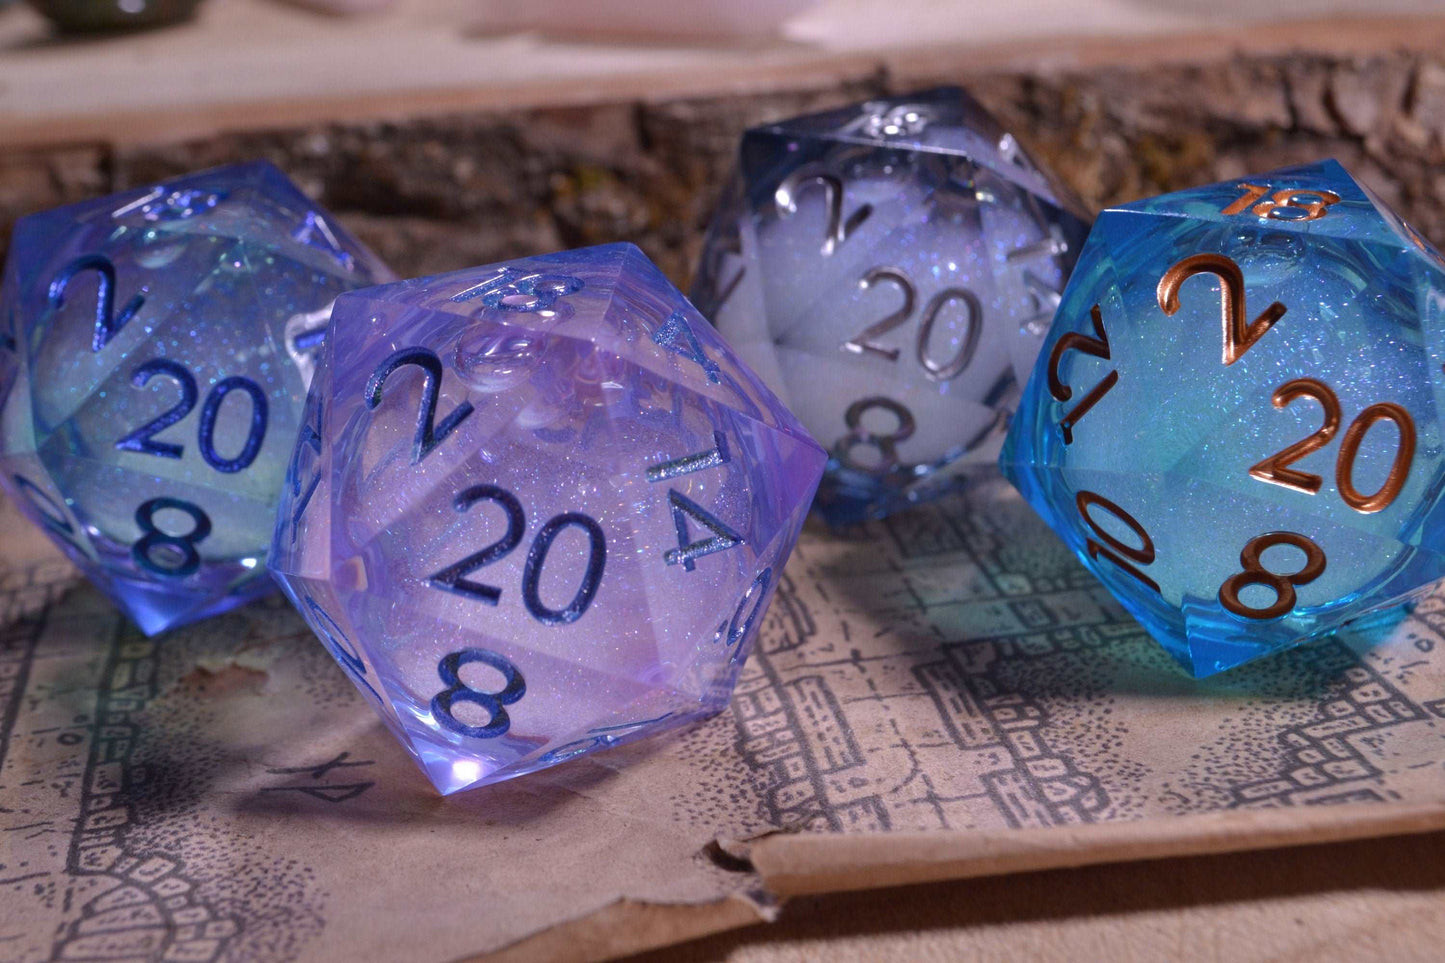 Large Chonk Liquid Core D20 DnD Dice With Metallic Numbering - Big D20 - Sharp Edge Resin -  For Dungeons and Dragons